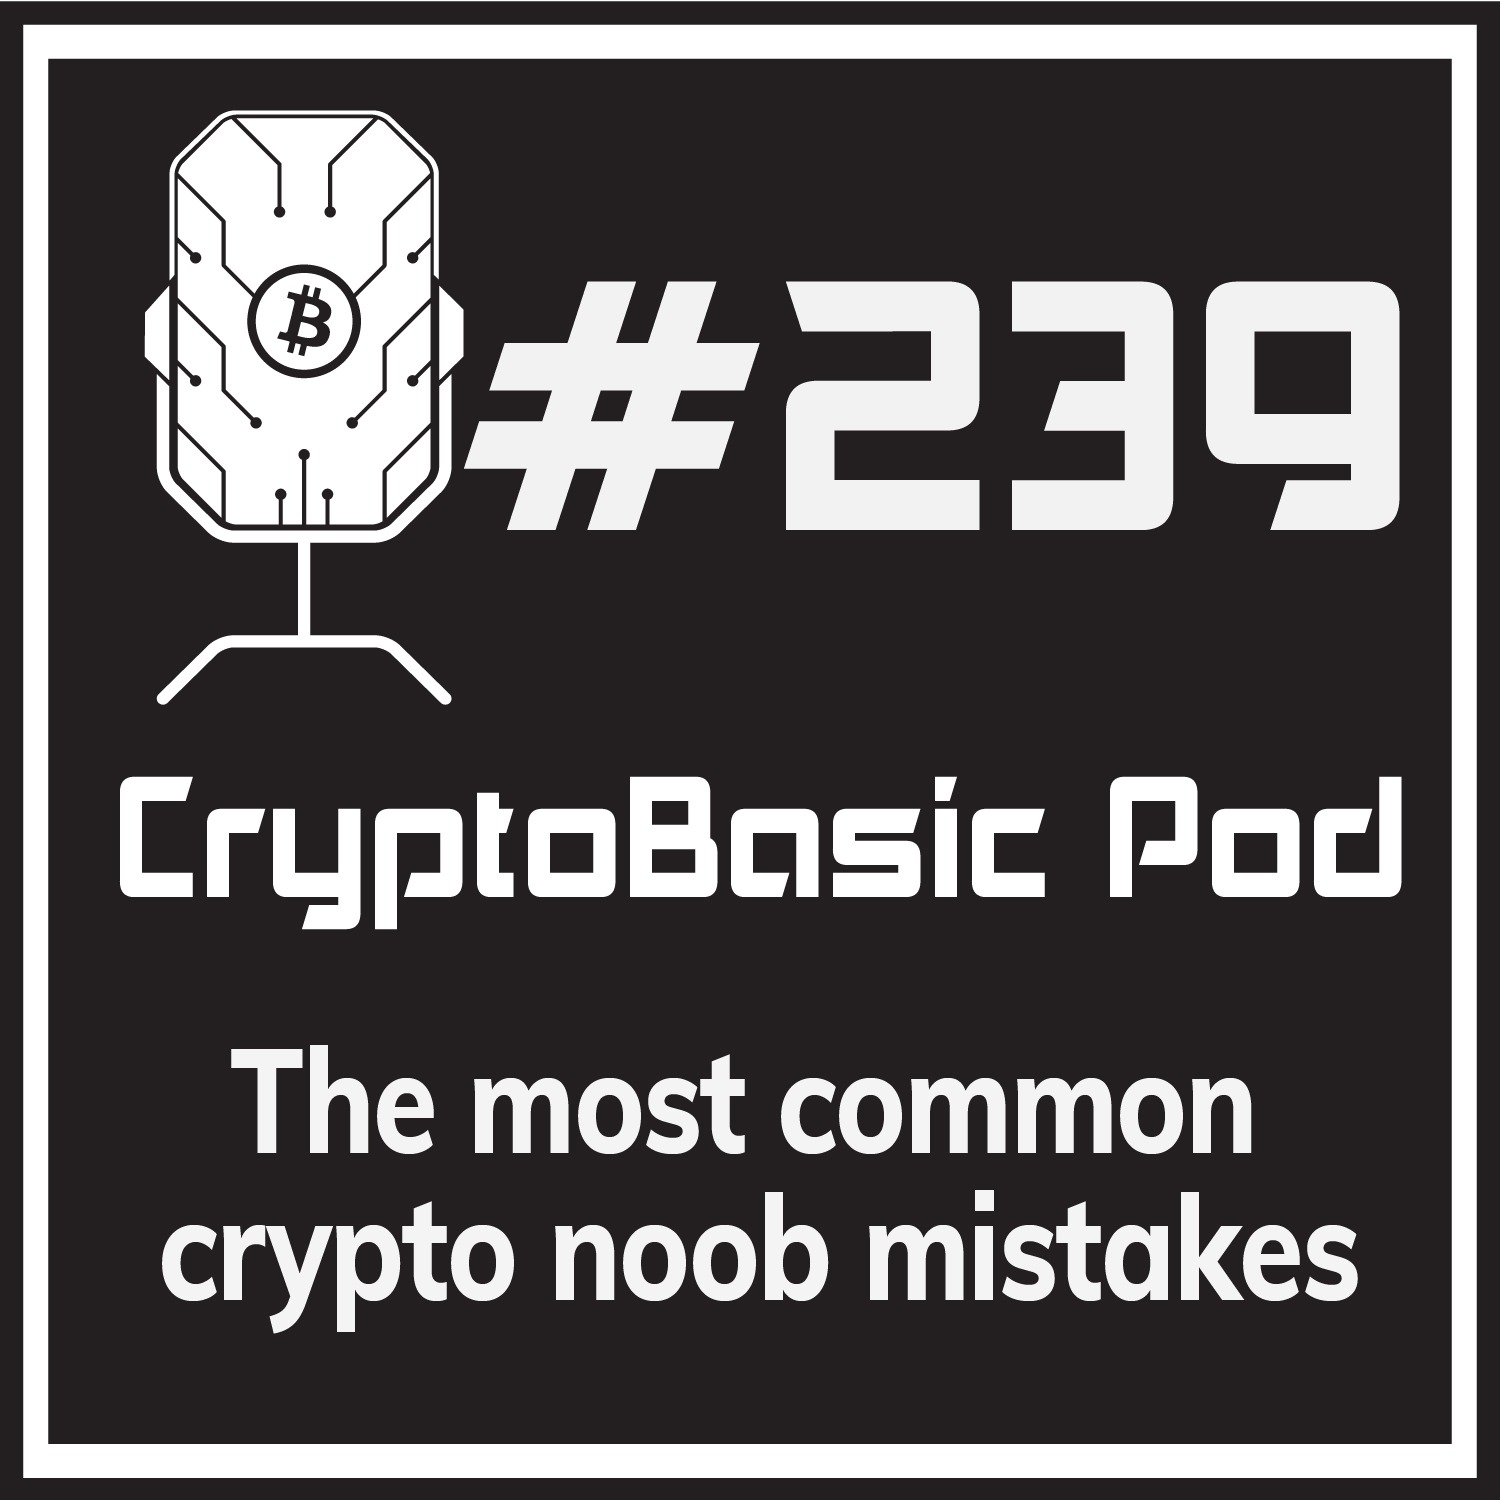 Episode 239 - The most common crypto noob mistakes